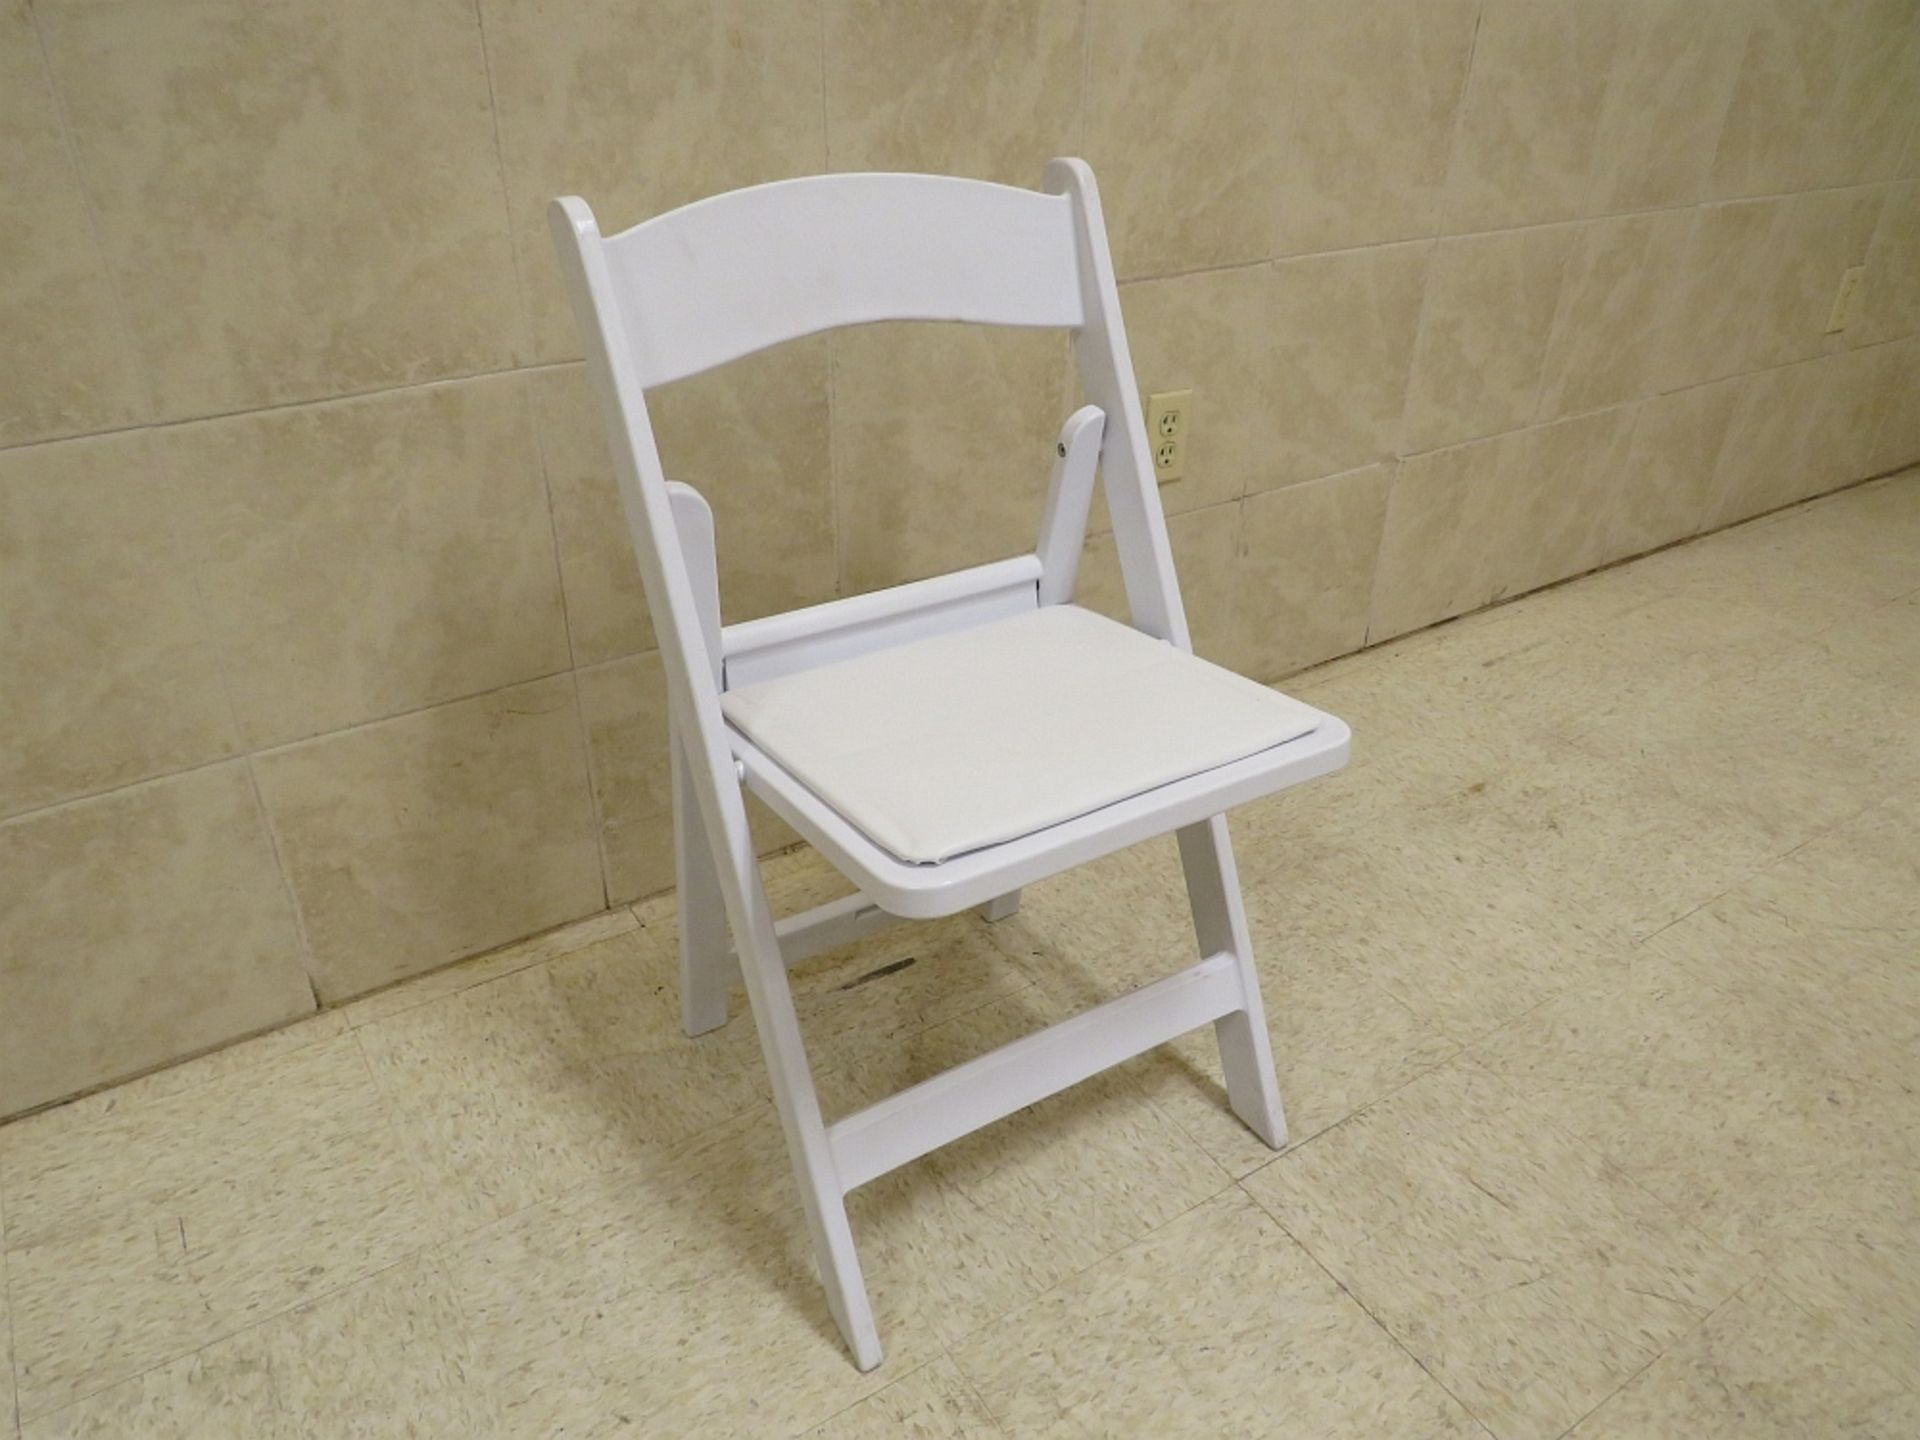 Resin Chair - PADDED White - Folding - A Stock